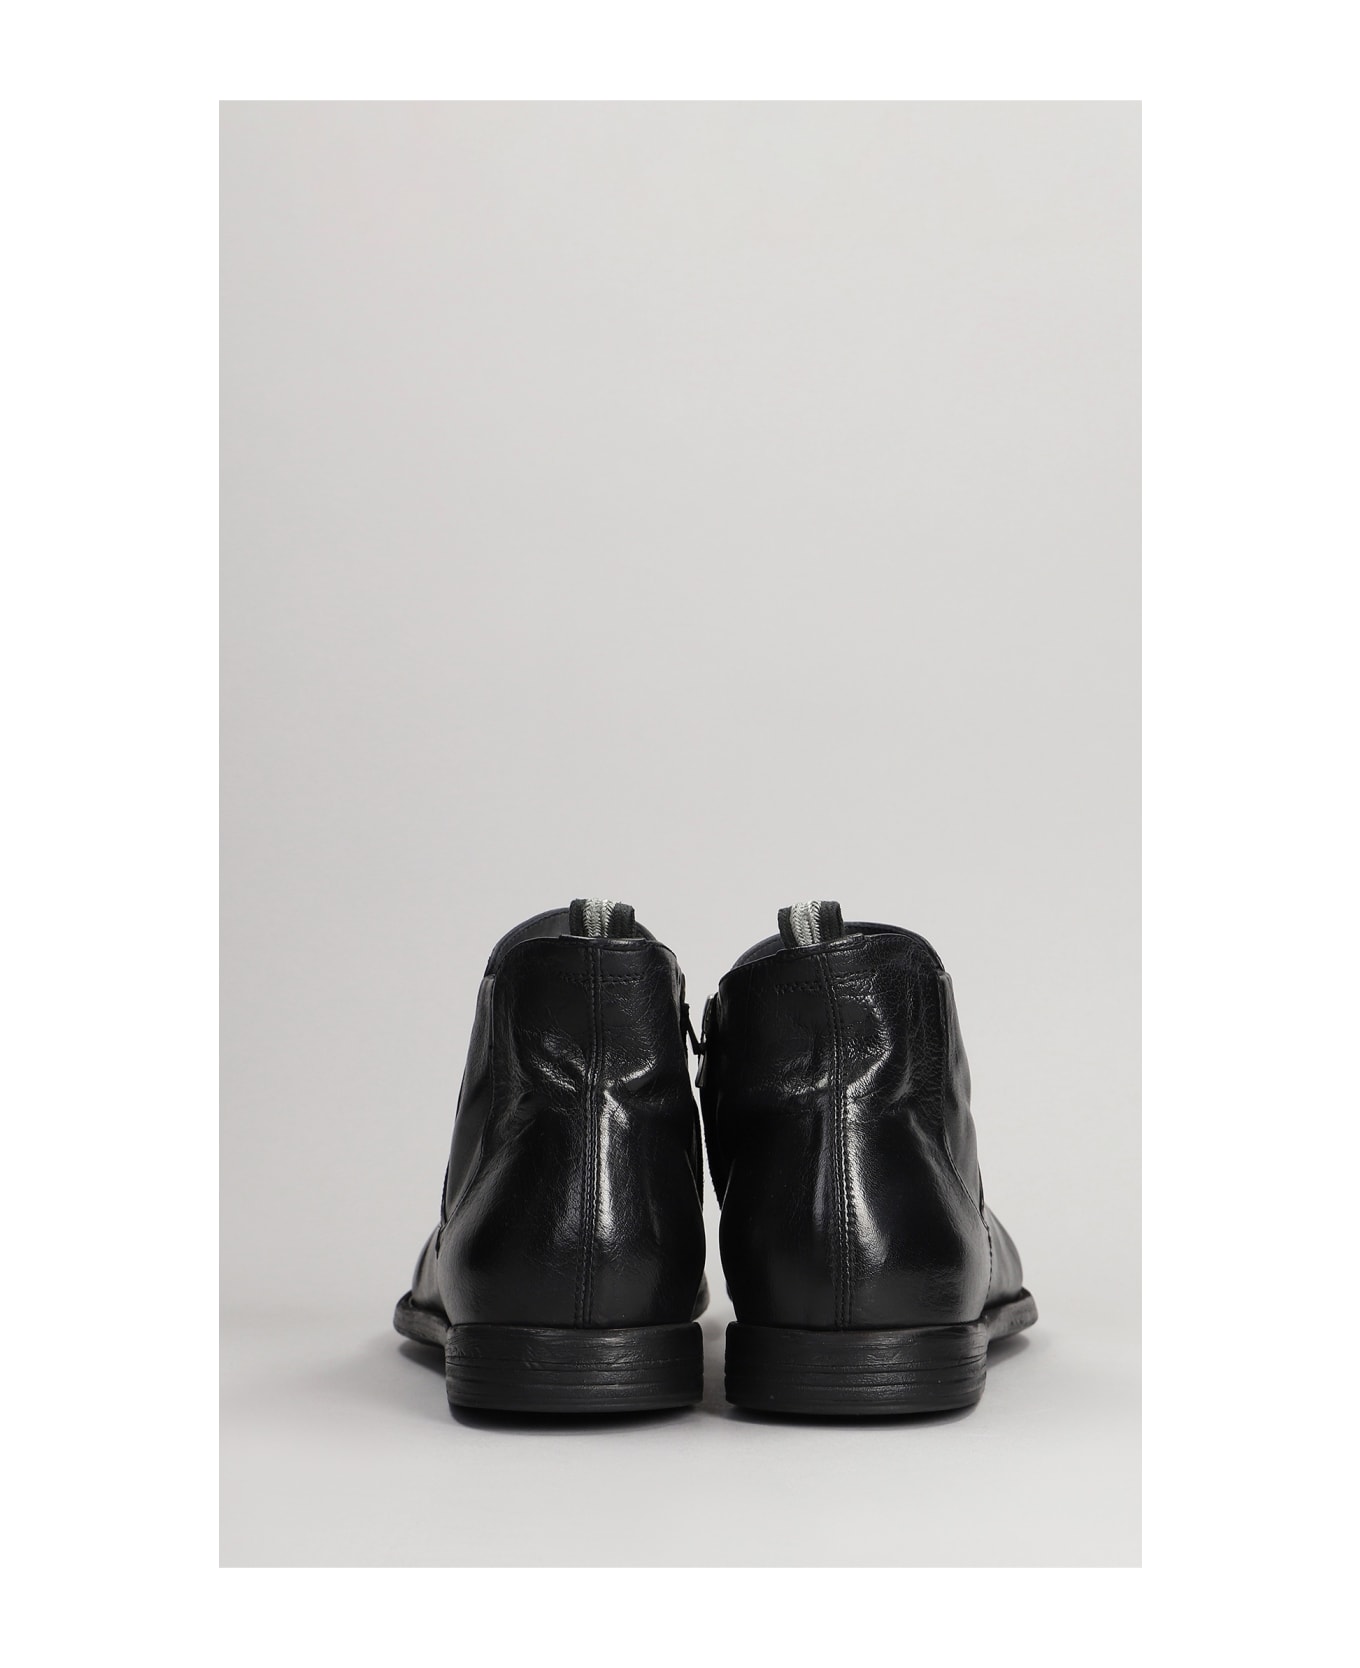 Officine Creative Arc -514 Ankle Boots In Black Leather - black ブーツ